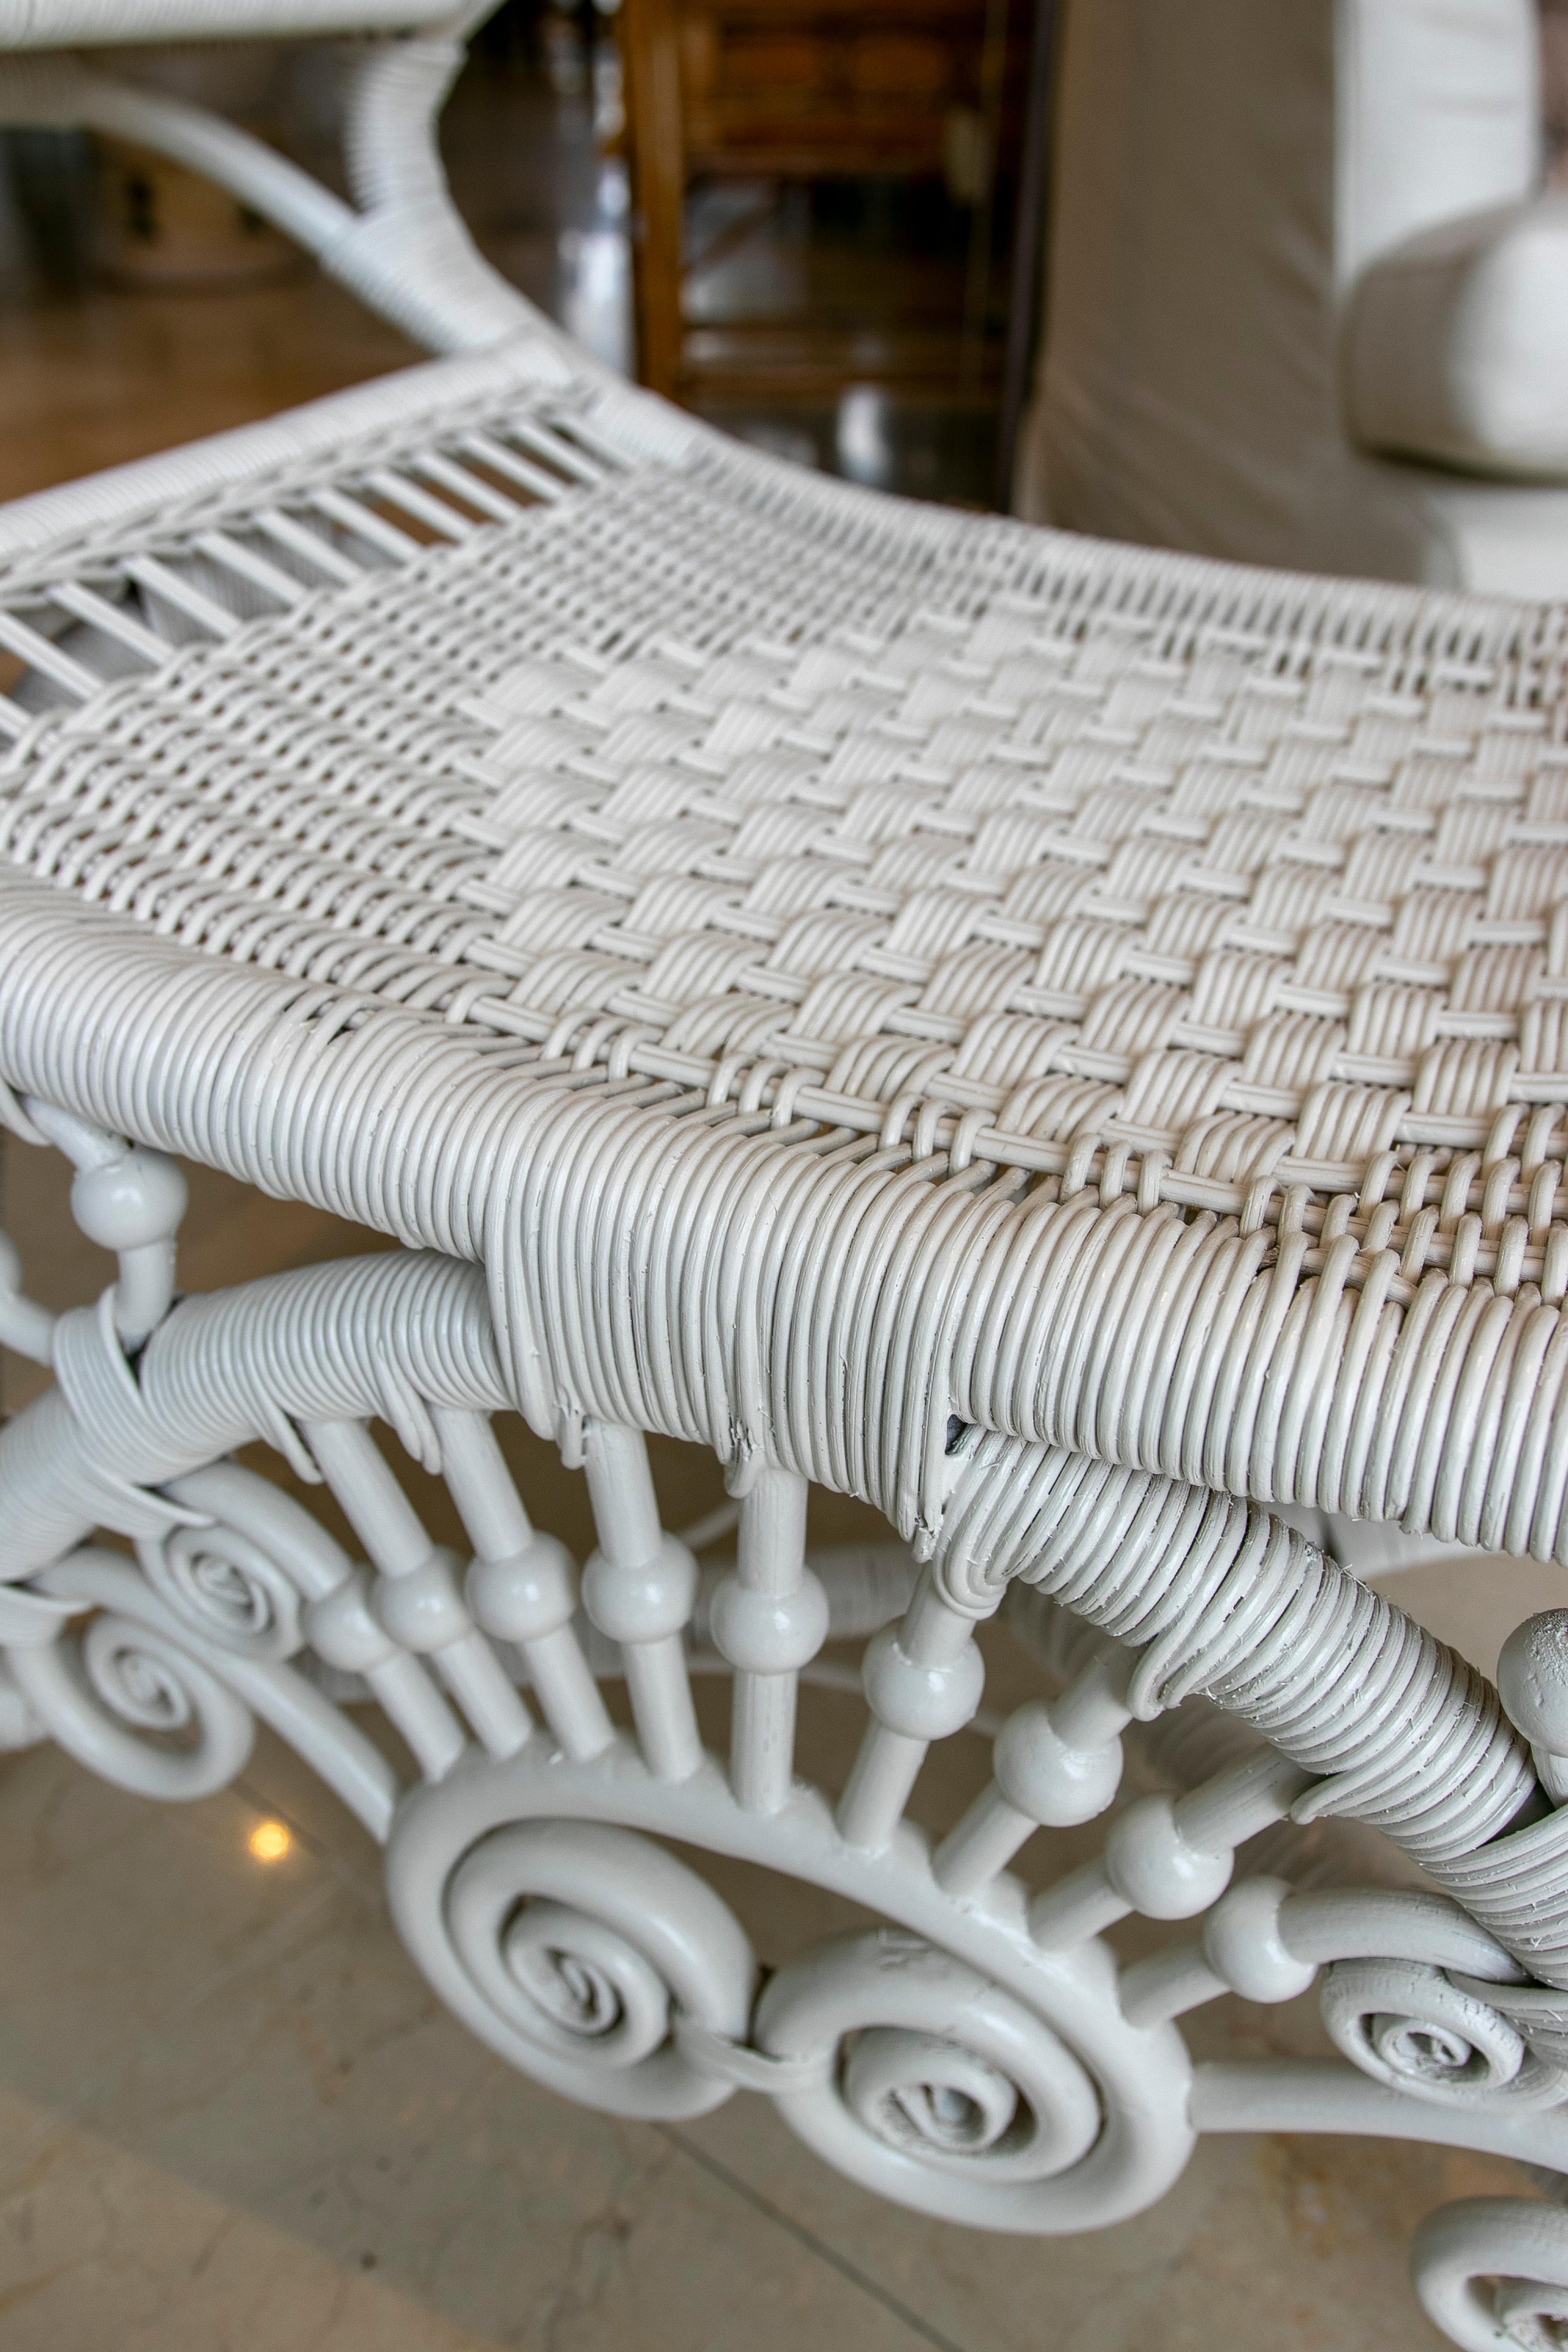 Spanish Handmade Wicker Stool Lacquered in White Colour For Sale 10